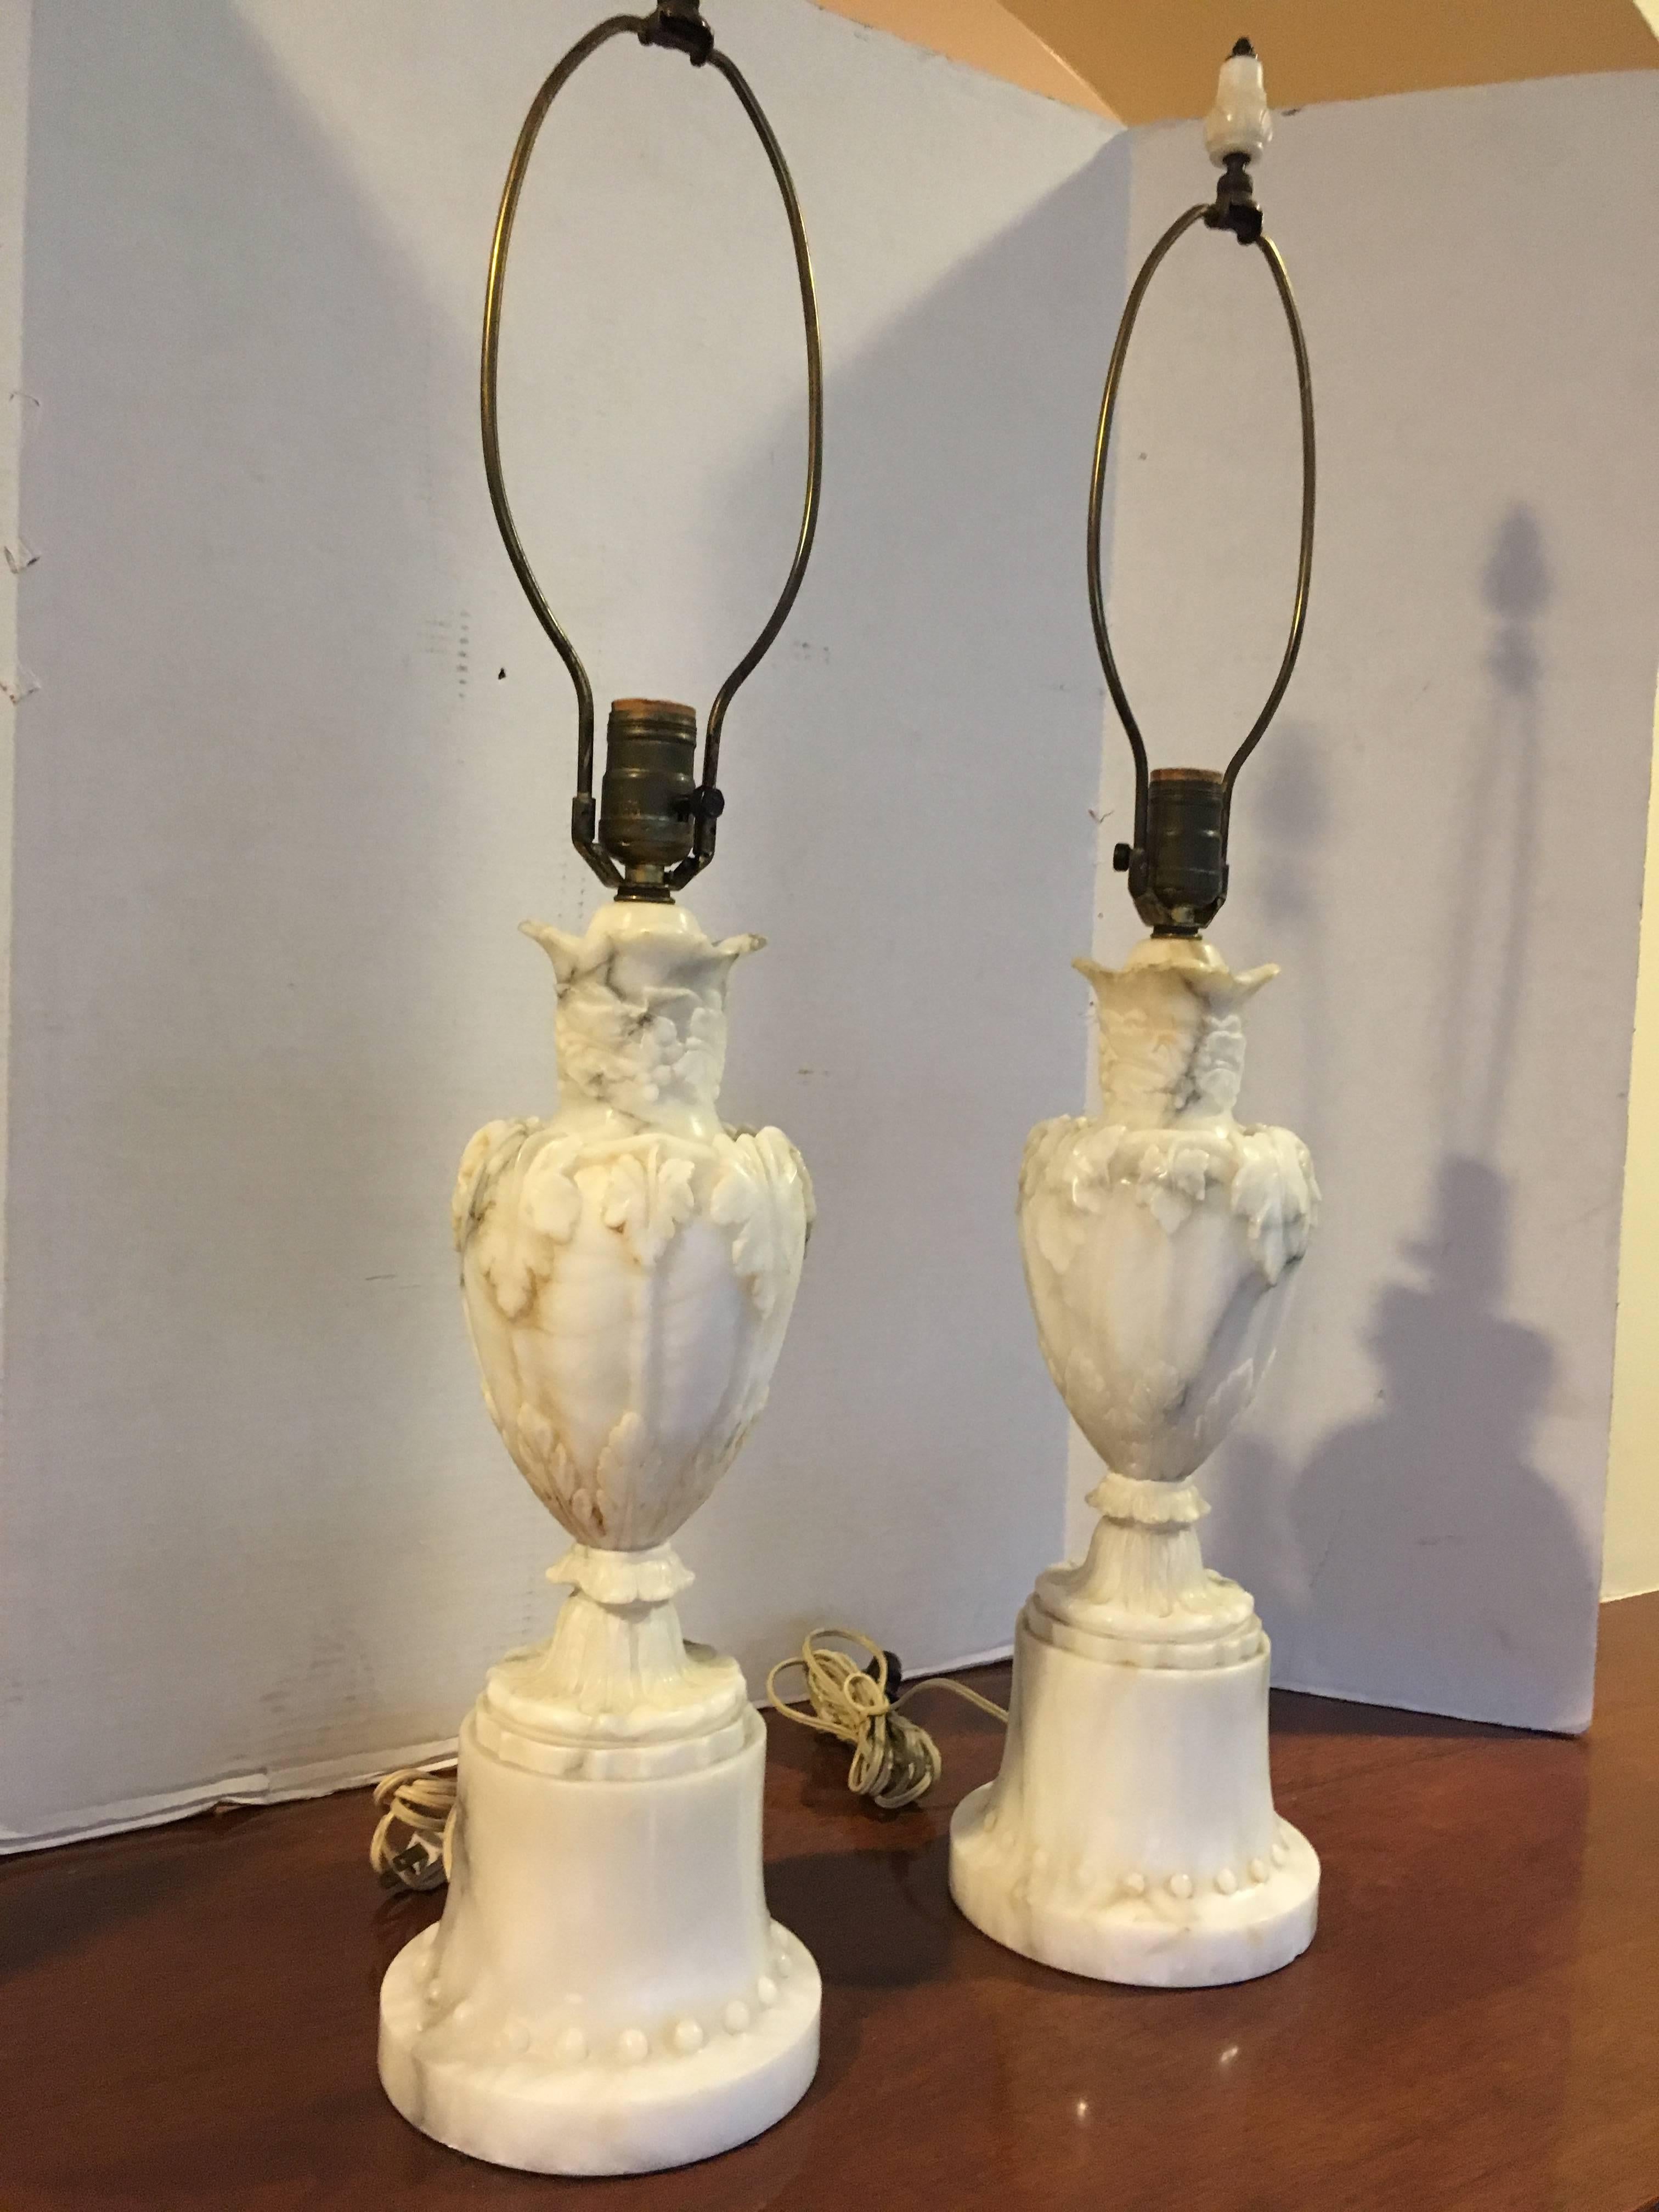 A pair of carved marble lamps from Italy.